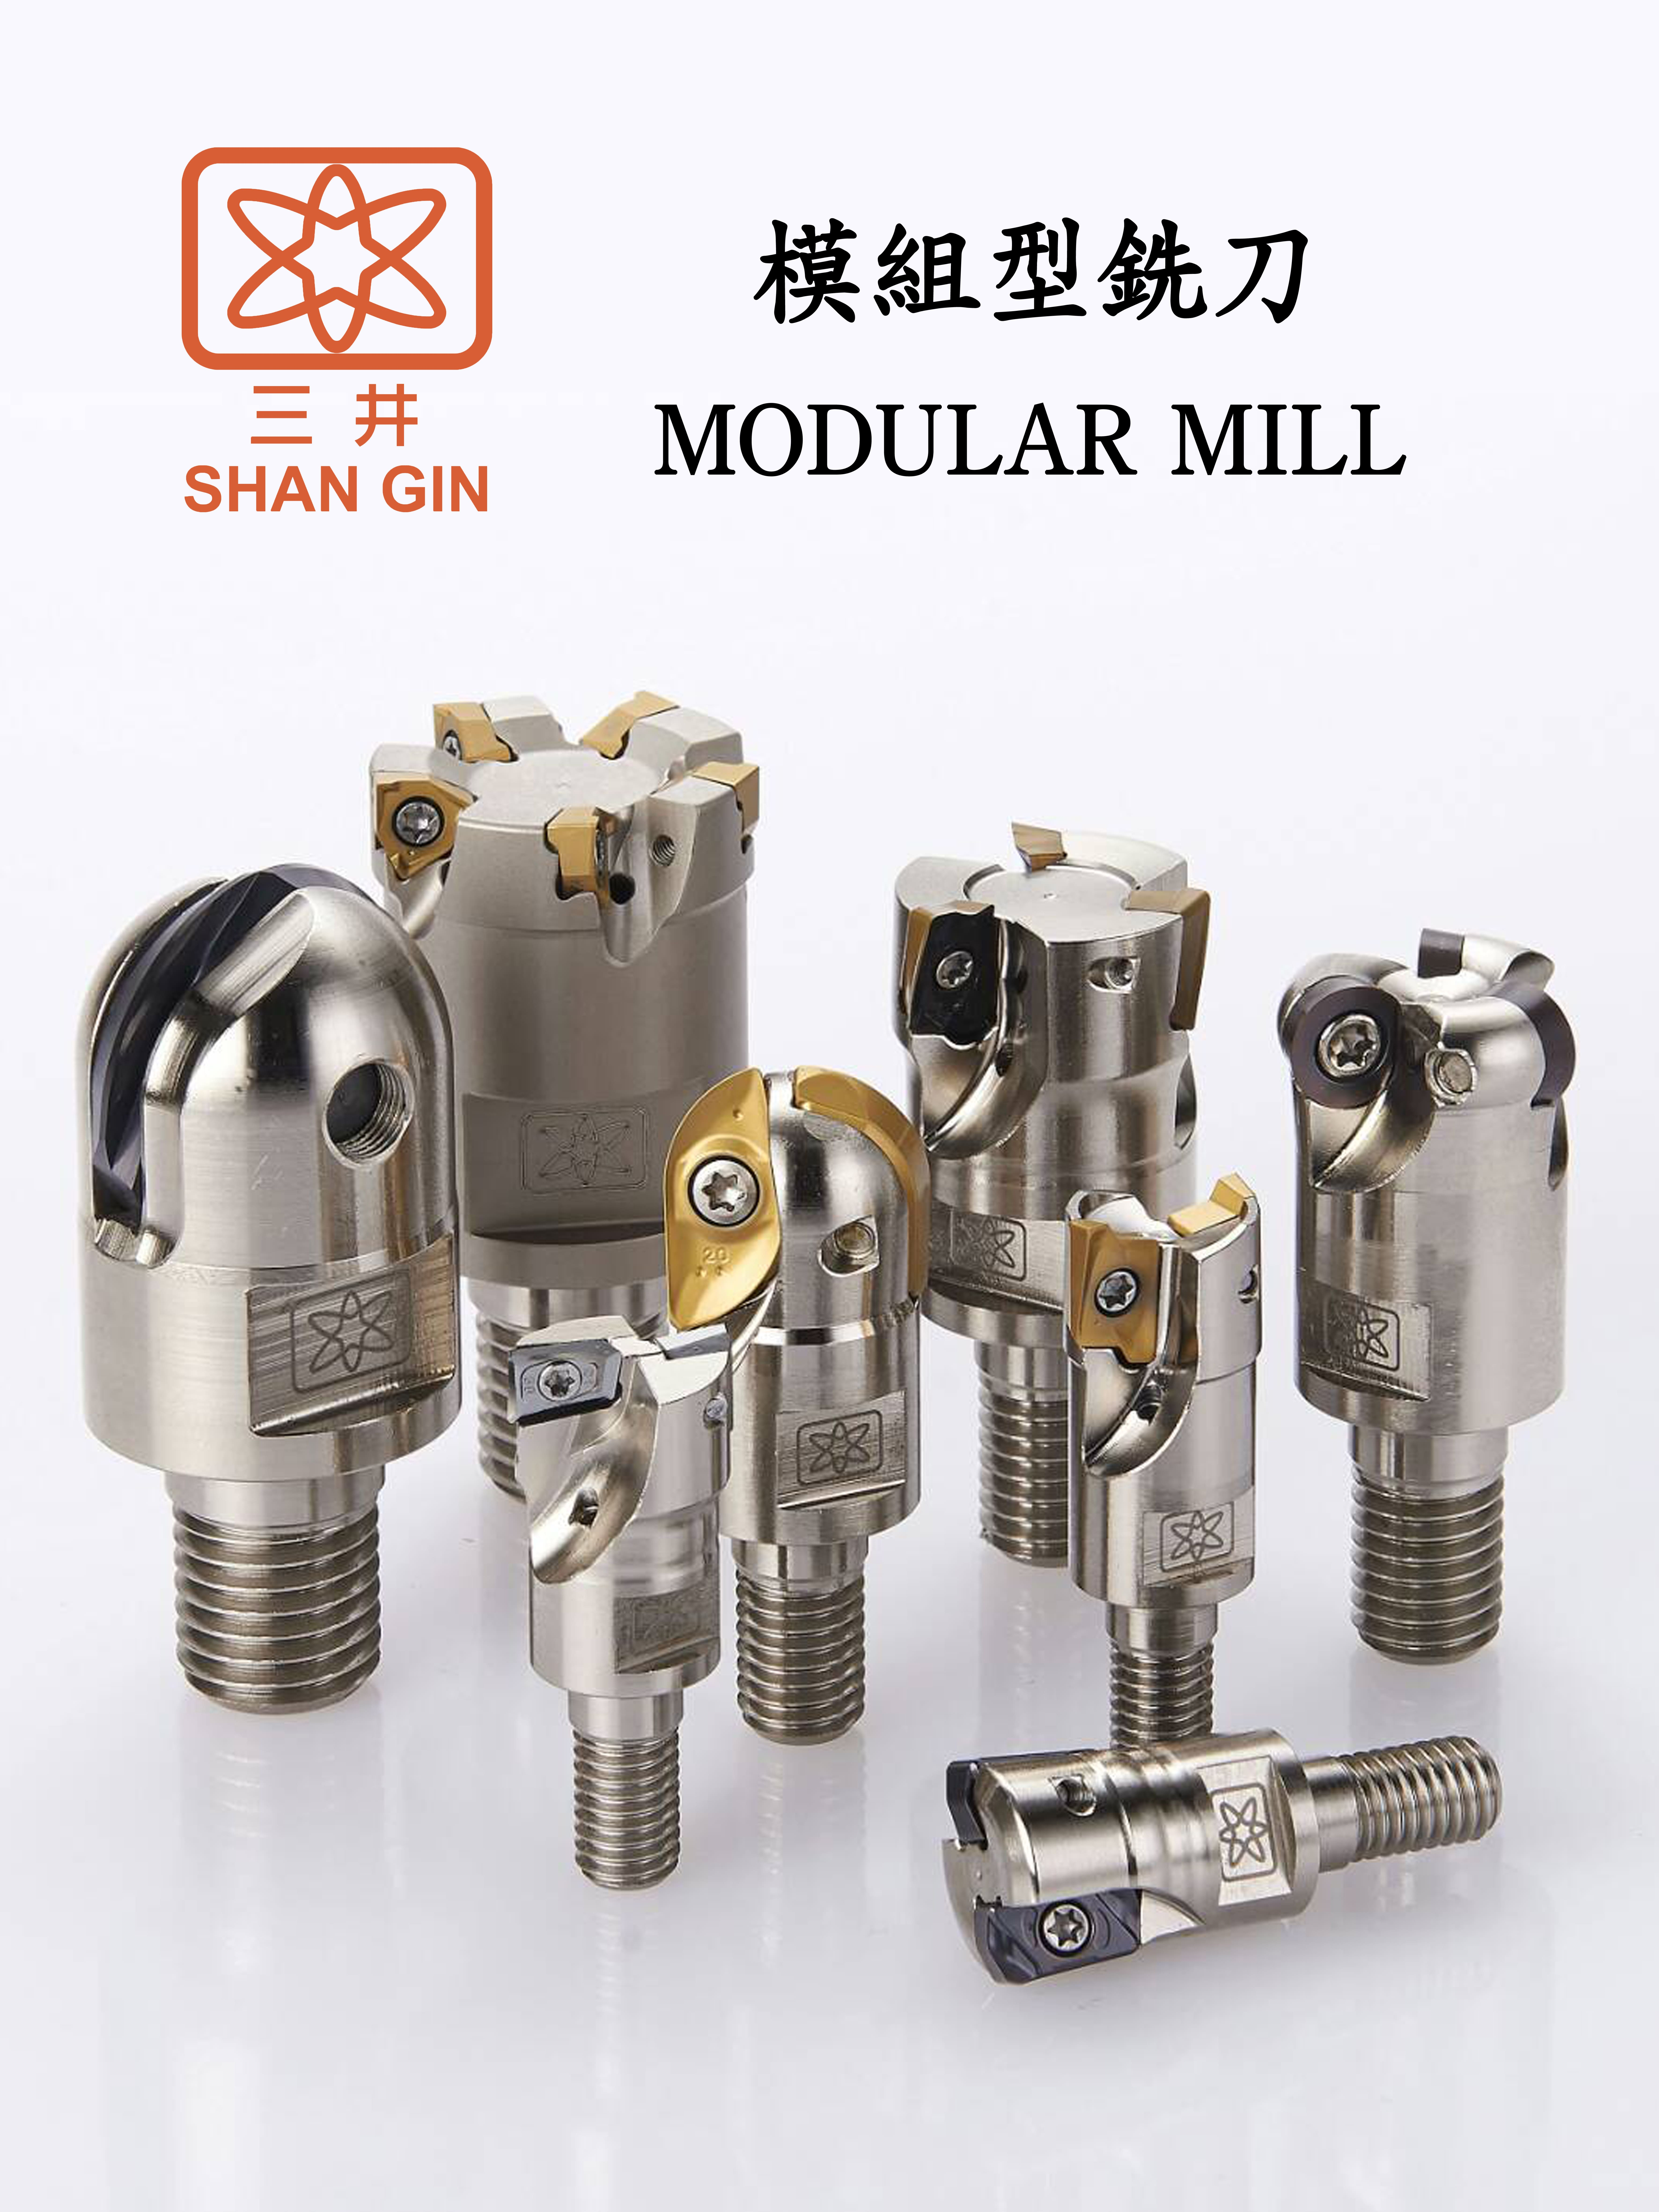 Products|MODULAR MILL